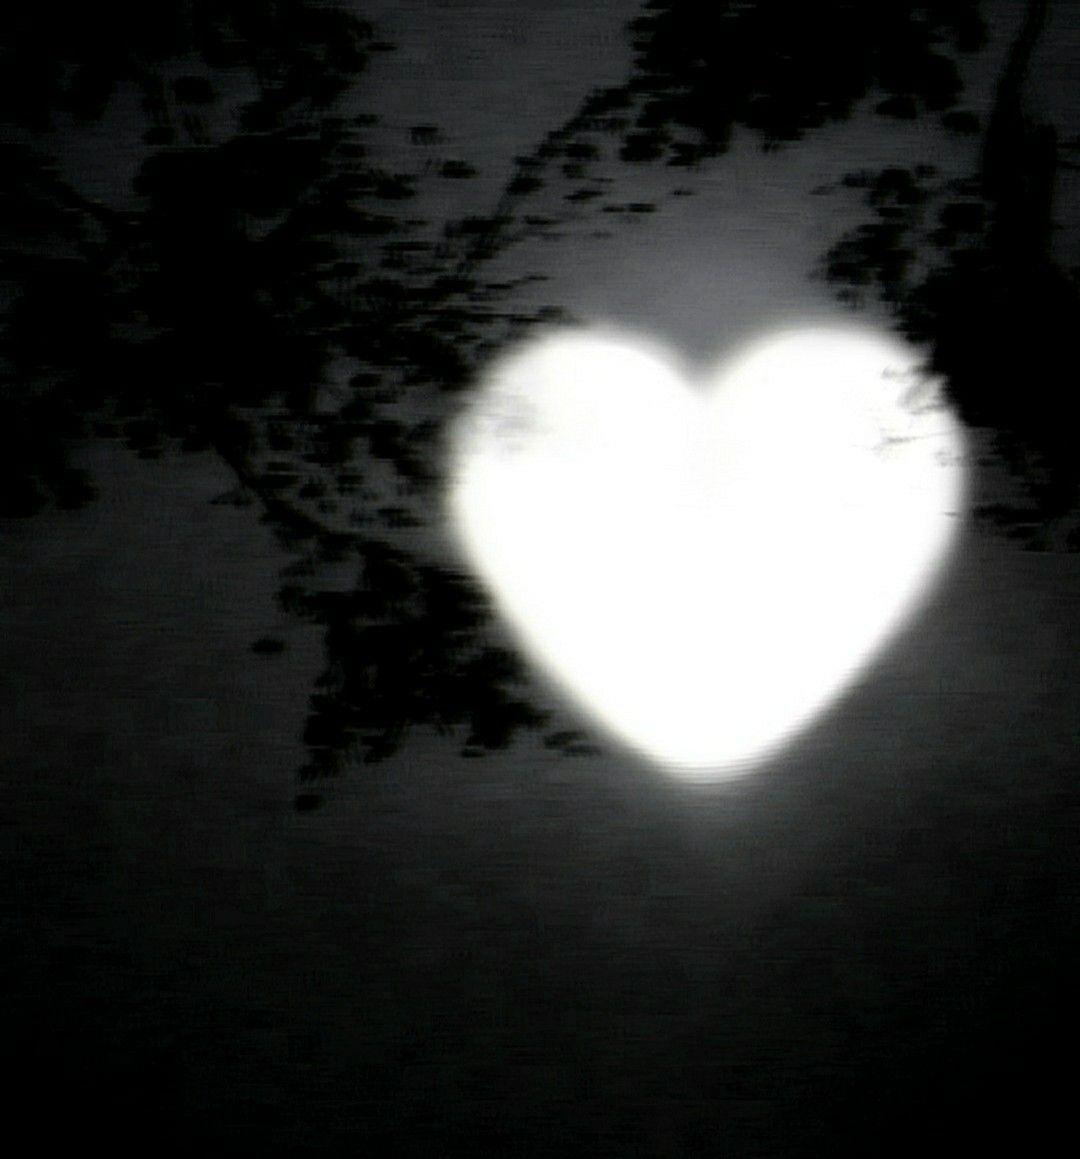 A heart shaped light in the dark - Lovecore